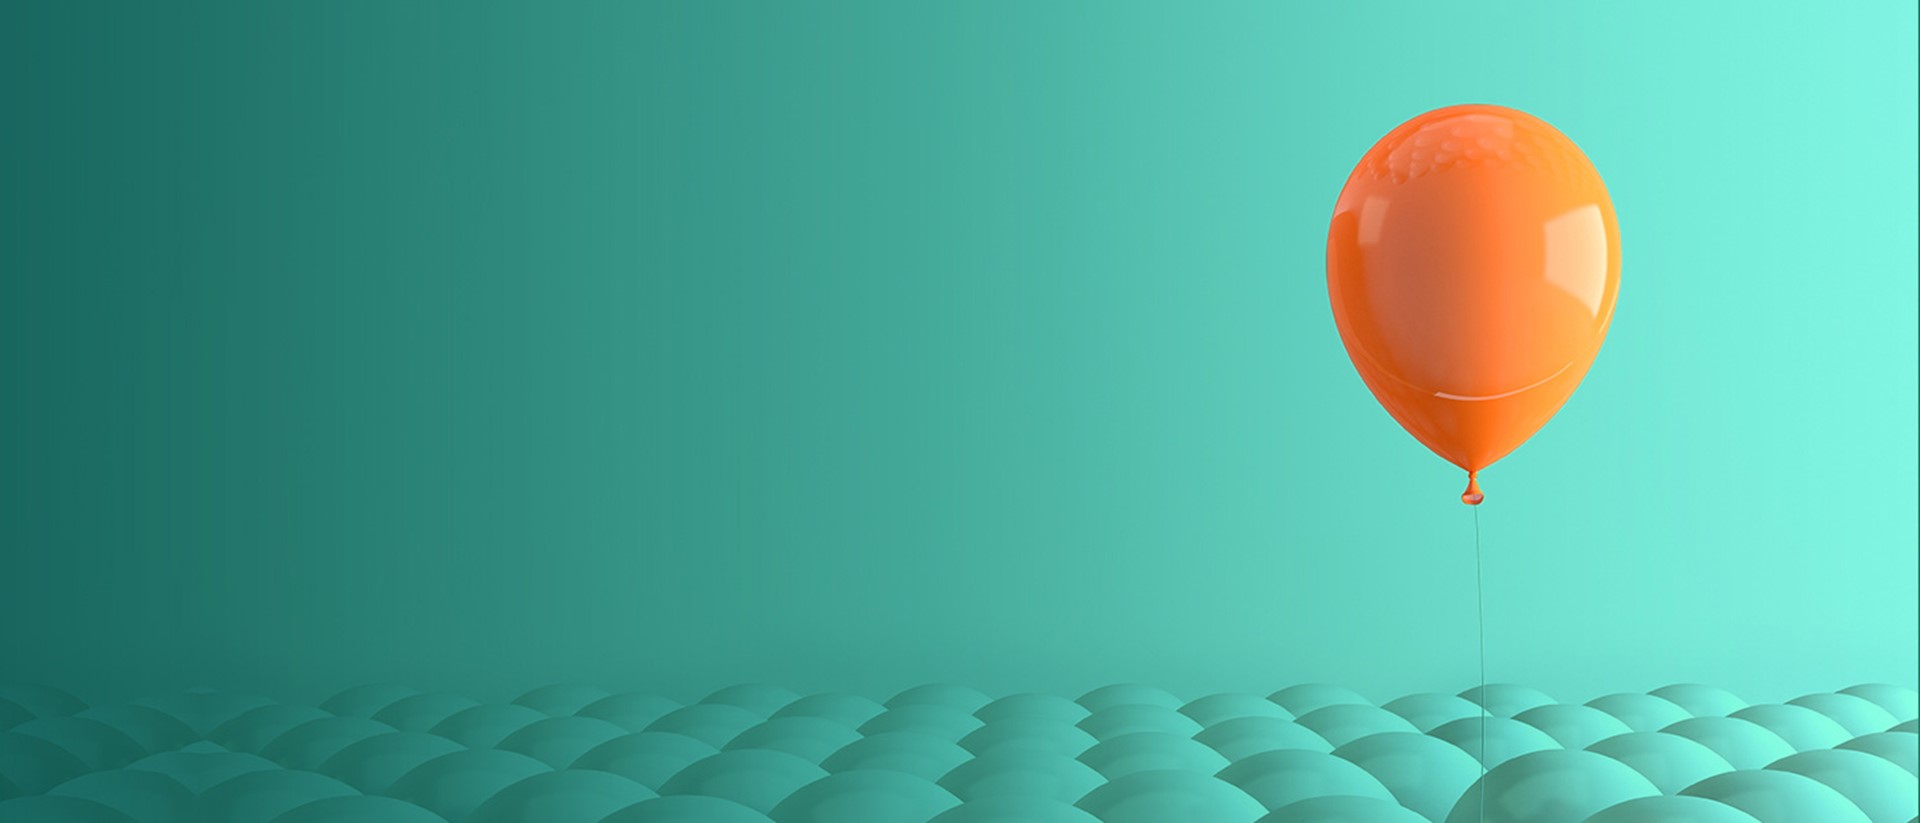 Image of an orange balloon on a teal background